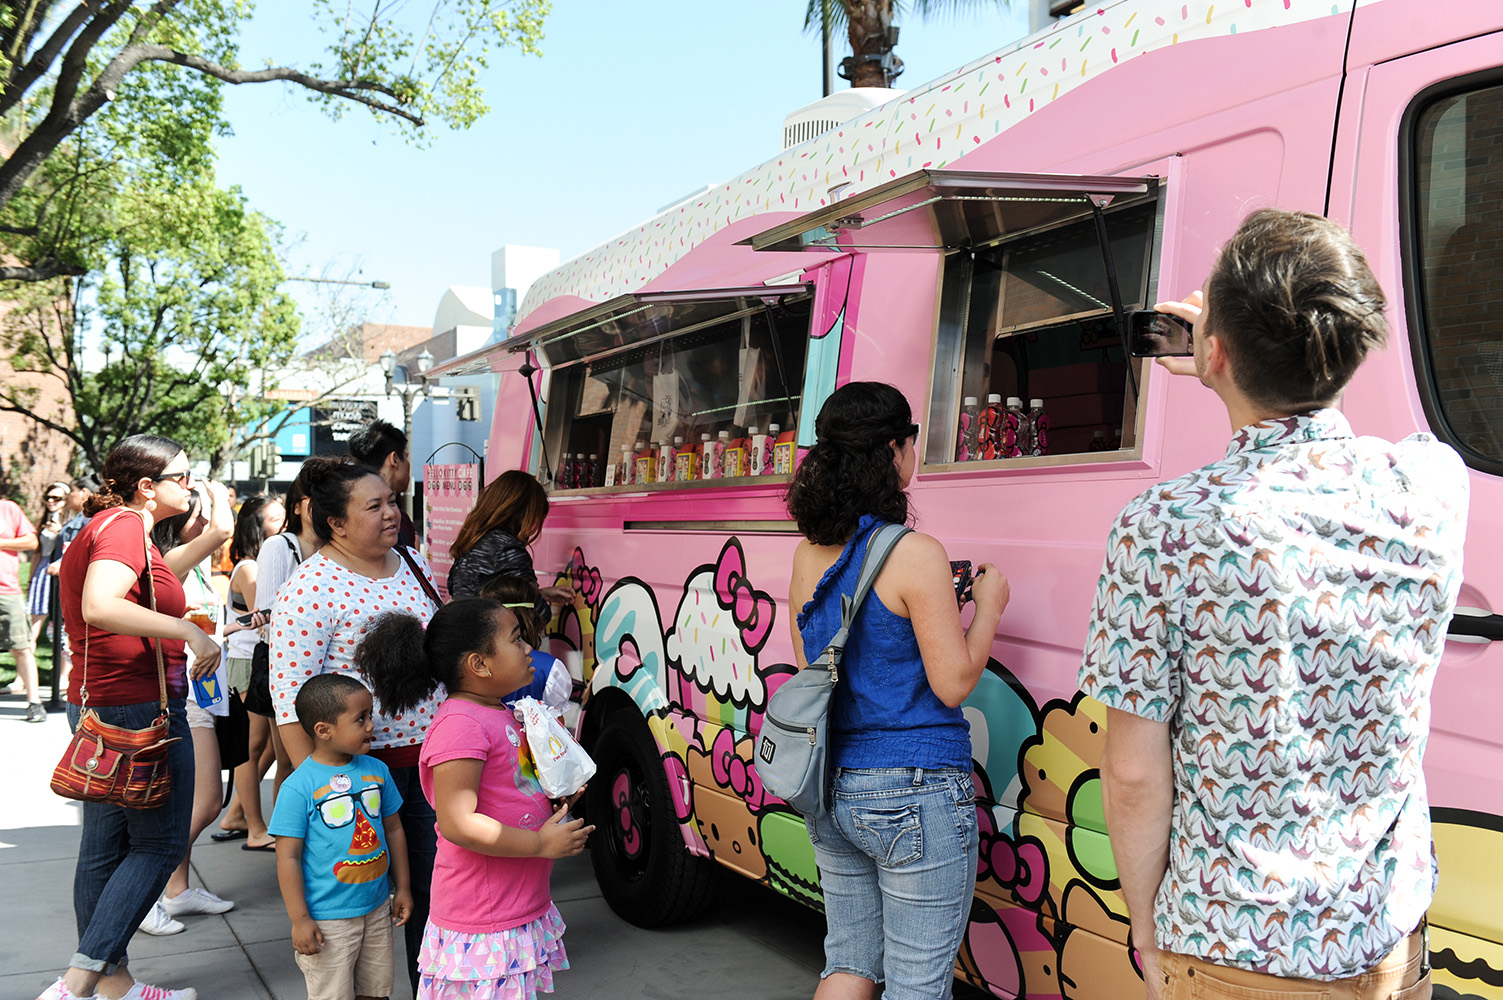 Hello Kitty Cafe Truck is Returning to San Diego County – NBC 7